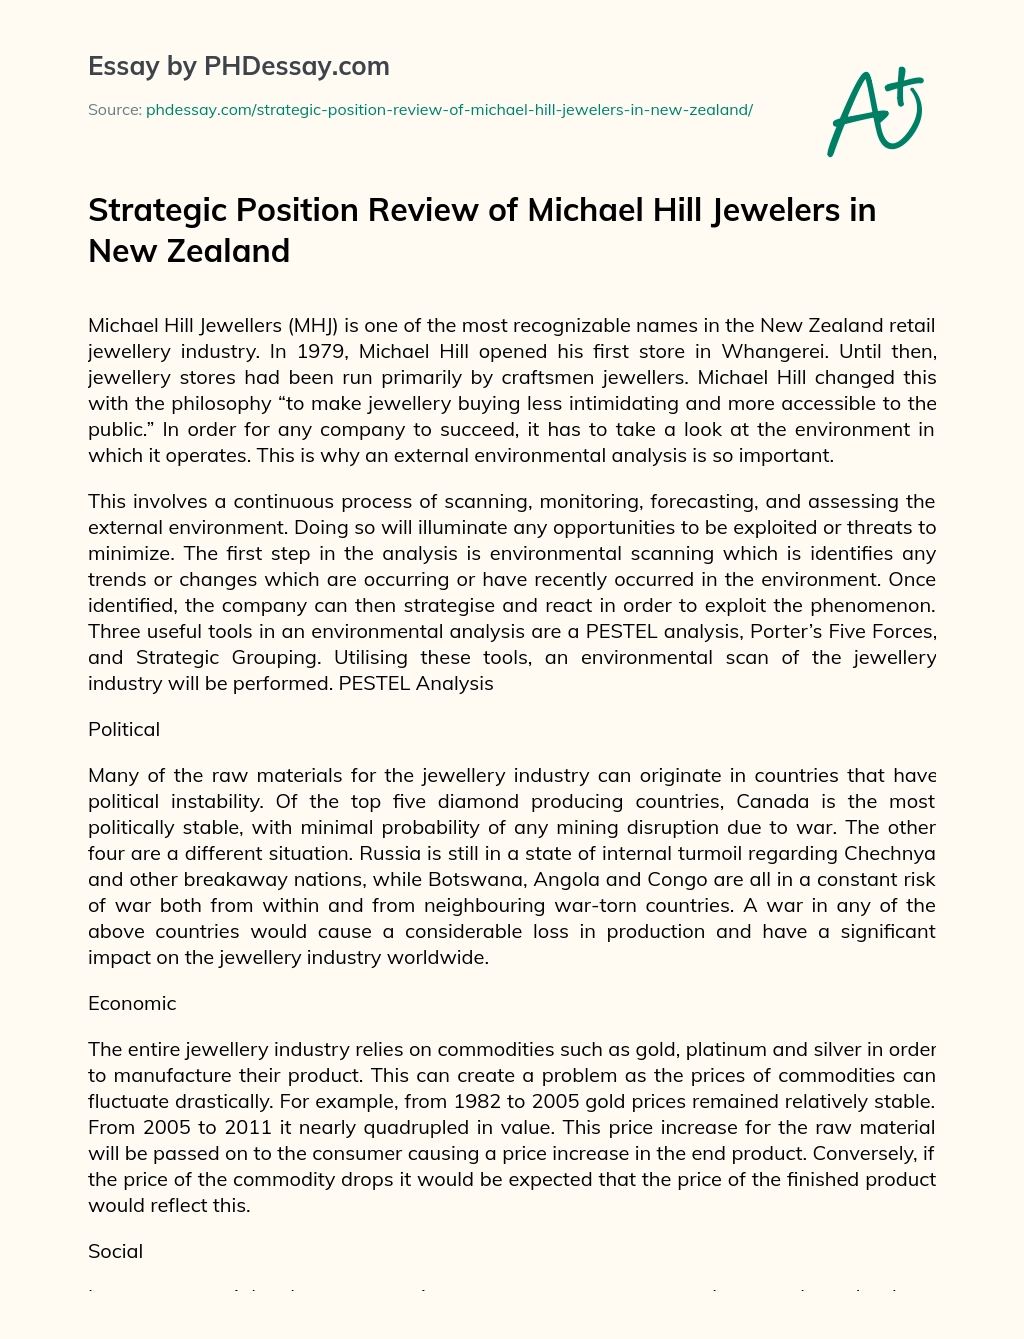 Strategic Position Review of Michael Hill Jewelers in New Zealand essay